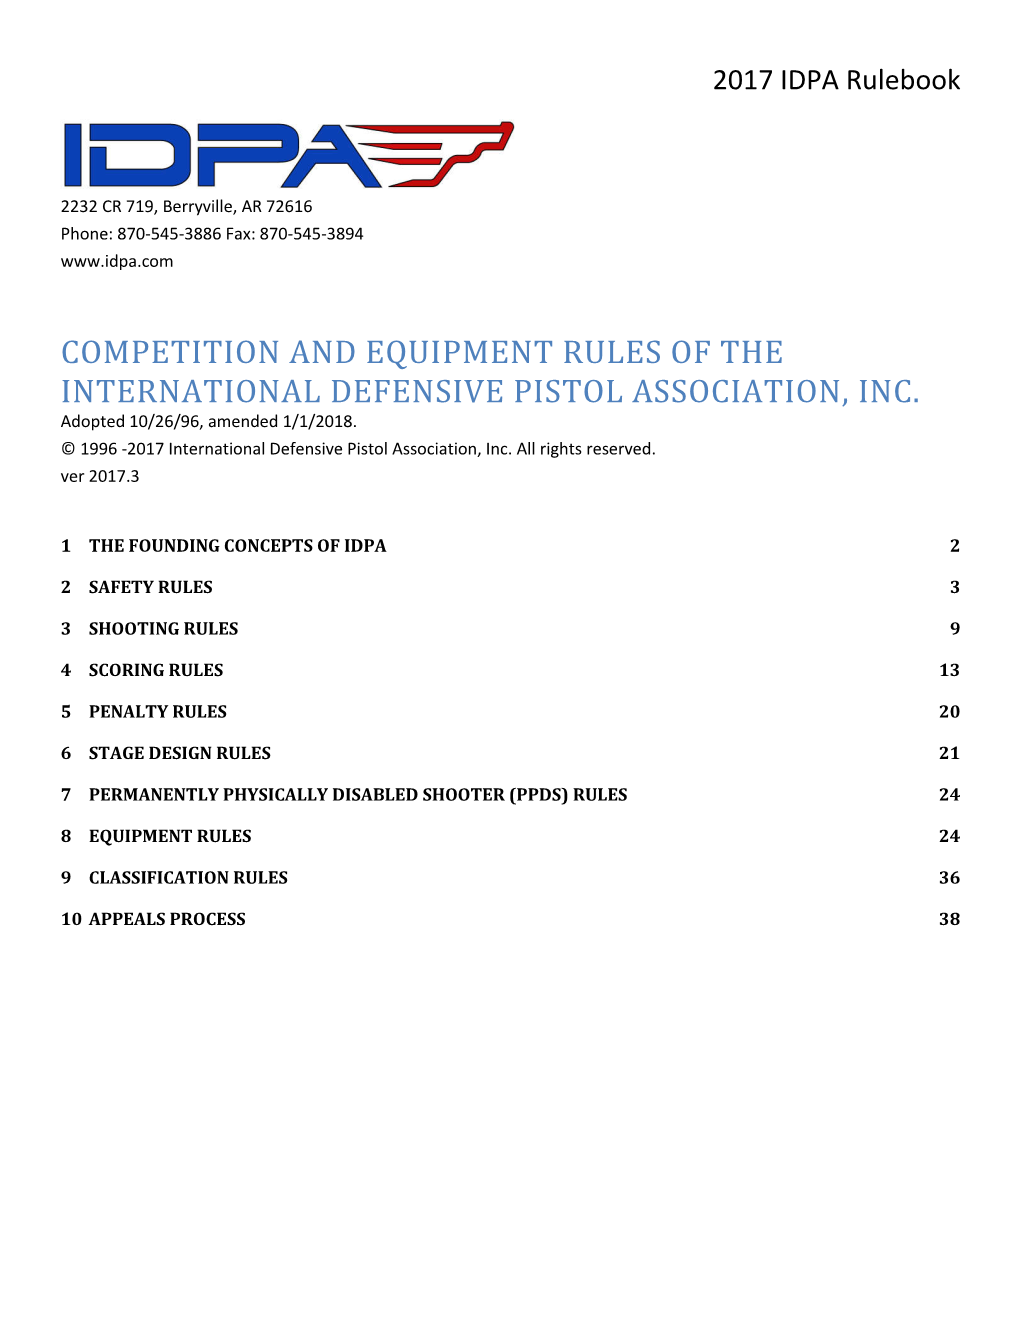 Competition and Equipment Rules of the International Defensive Pistol Association, Inc